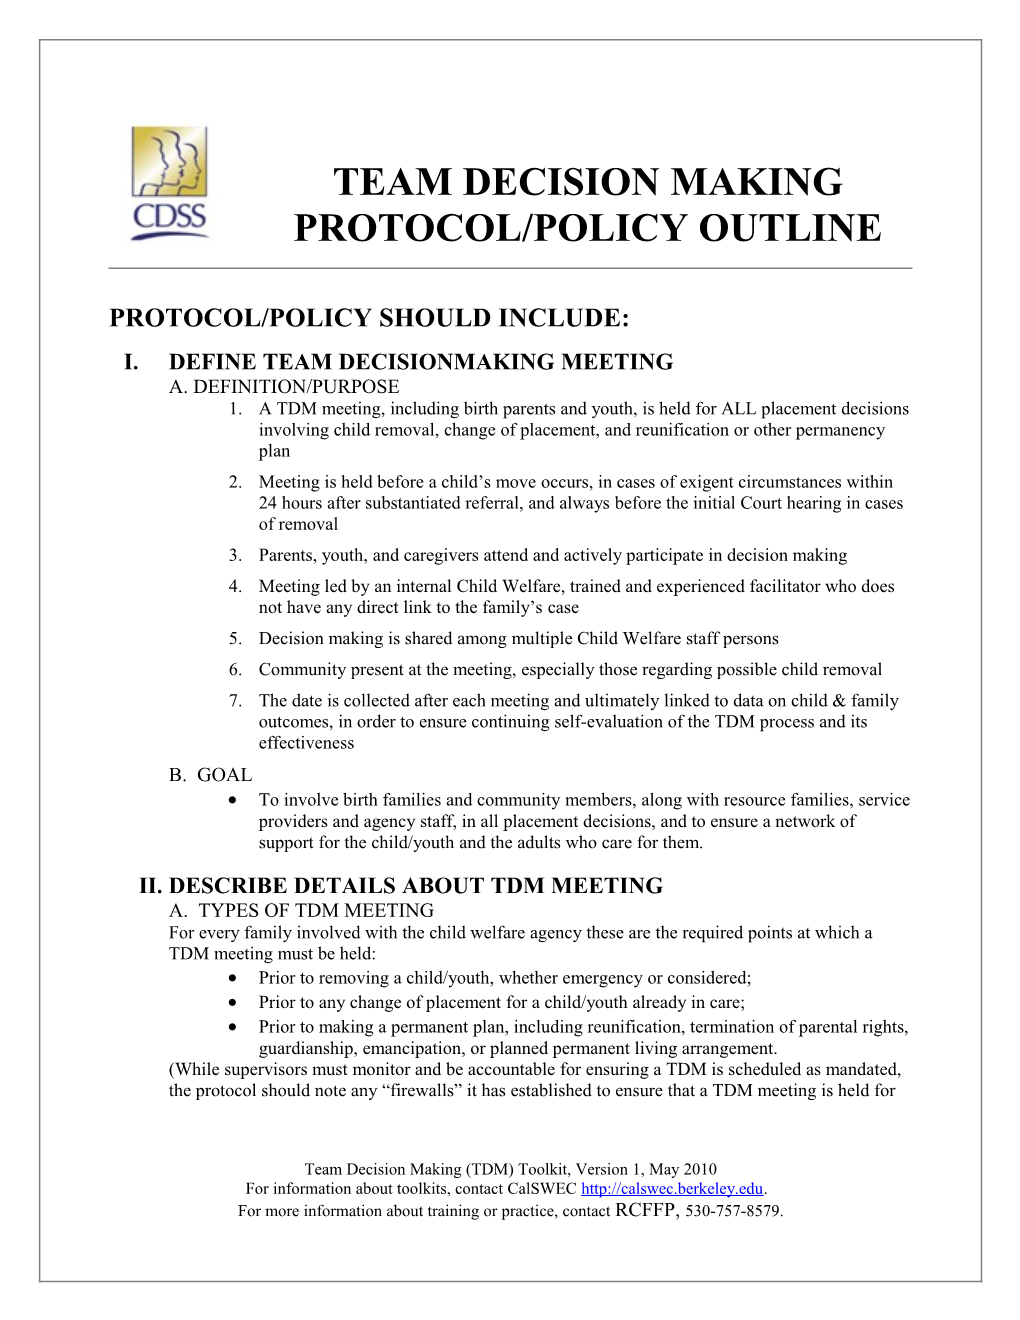 Outline For Team Decision-Making Protocol